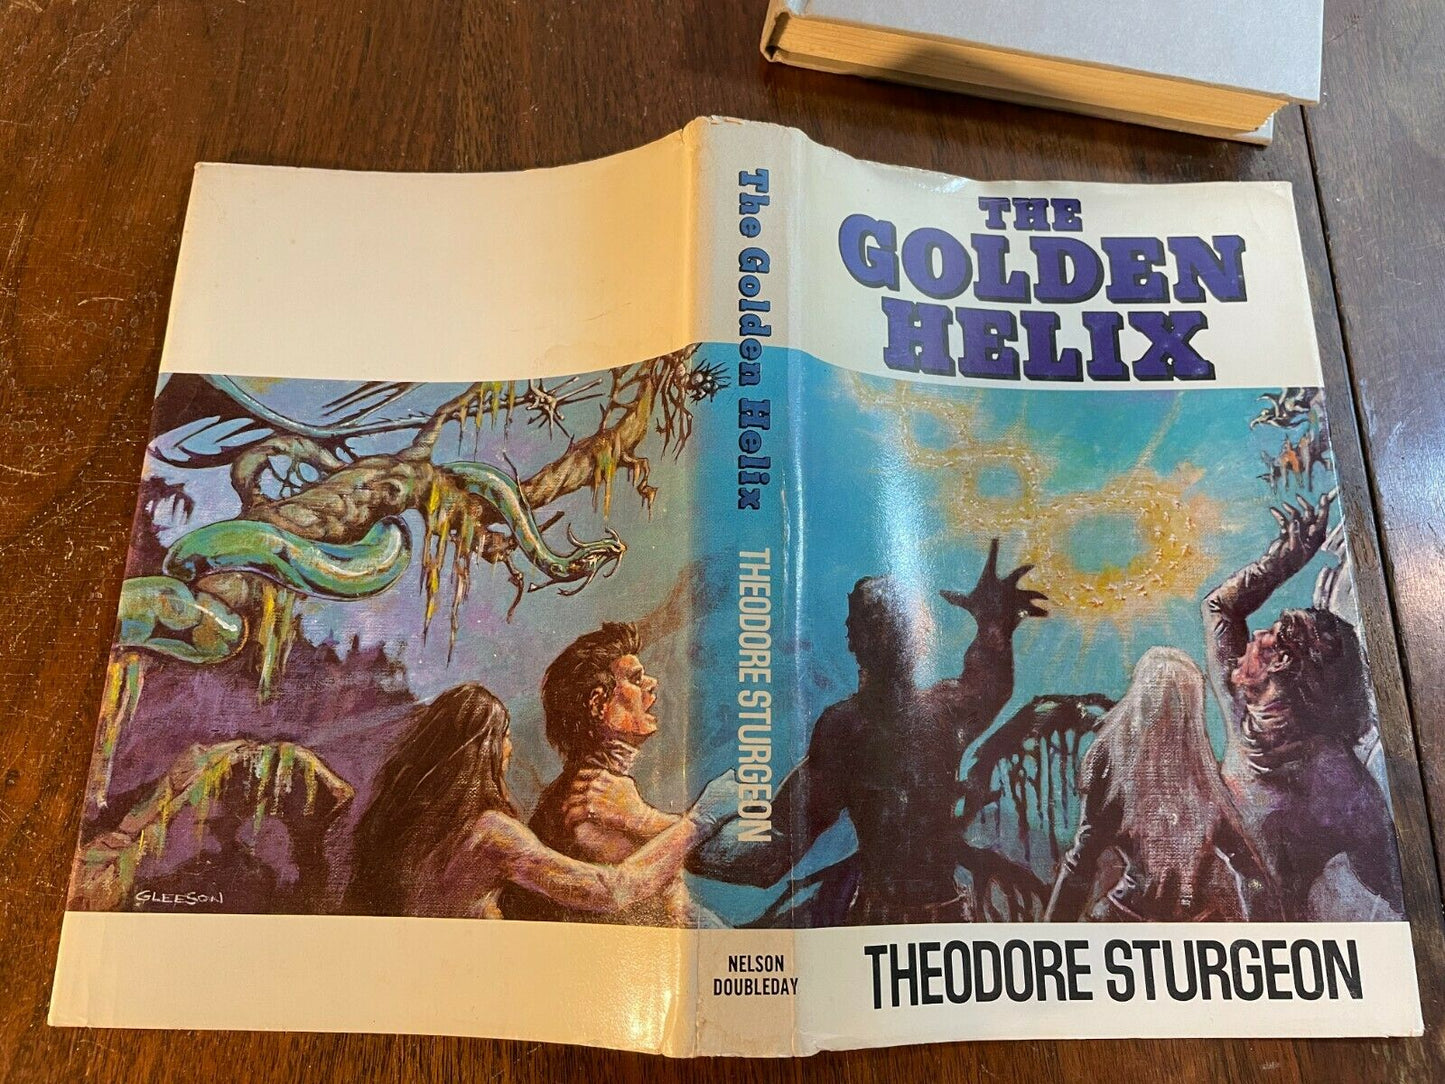 THE GOLDEN HELIX by Theodore Sturgeon, 1979